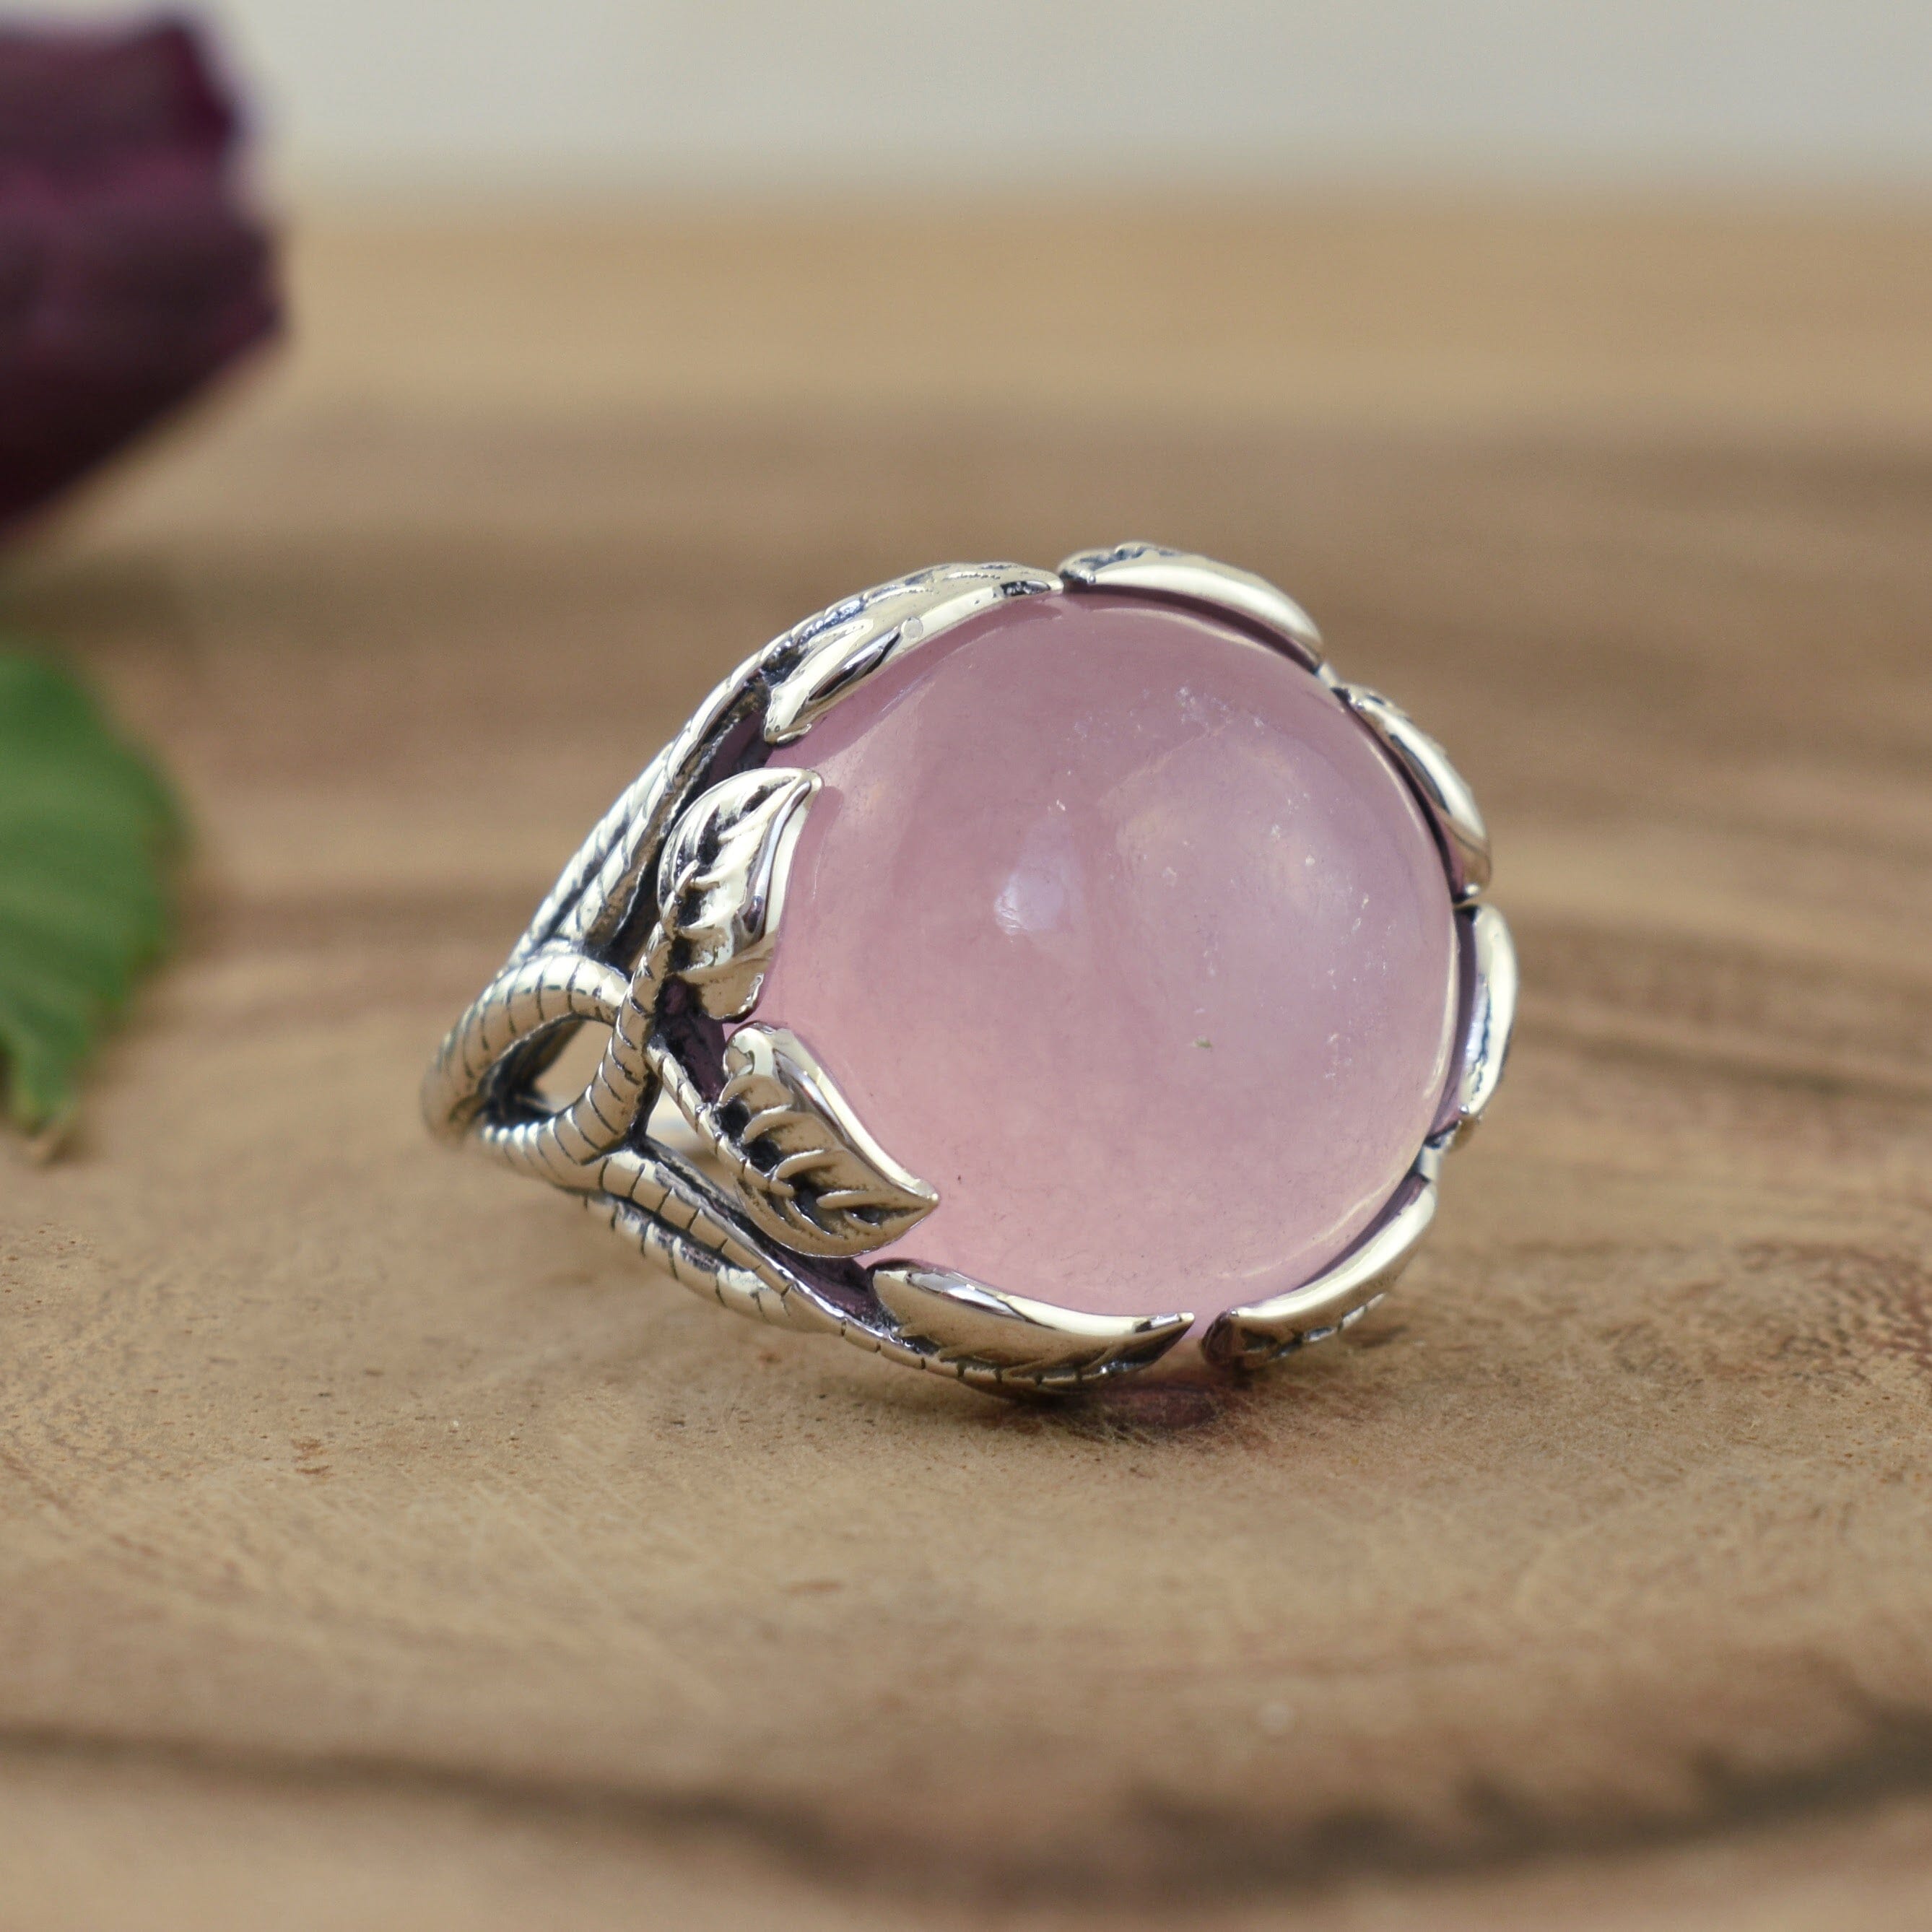 Light pink stone ring set in sterling silver